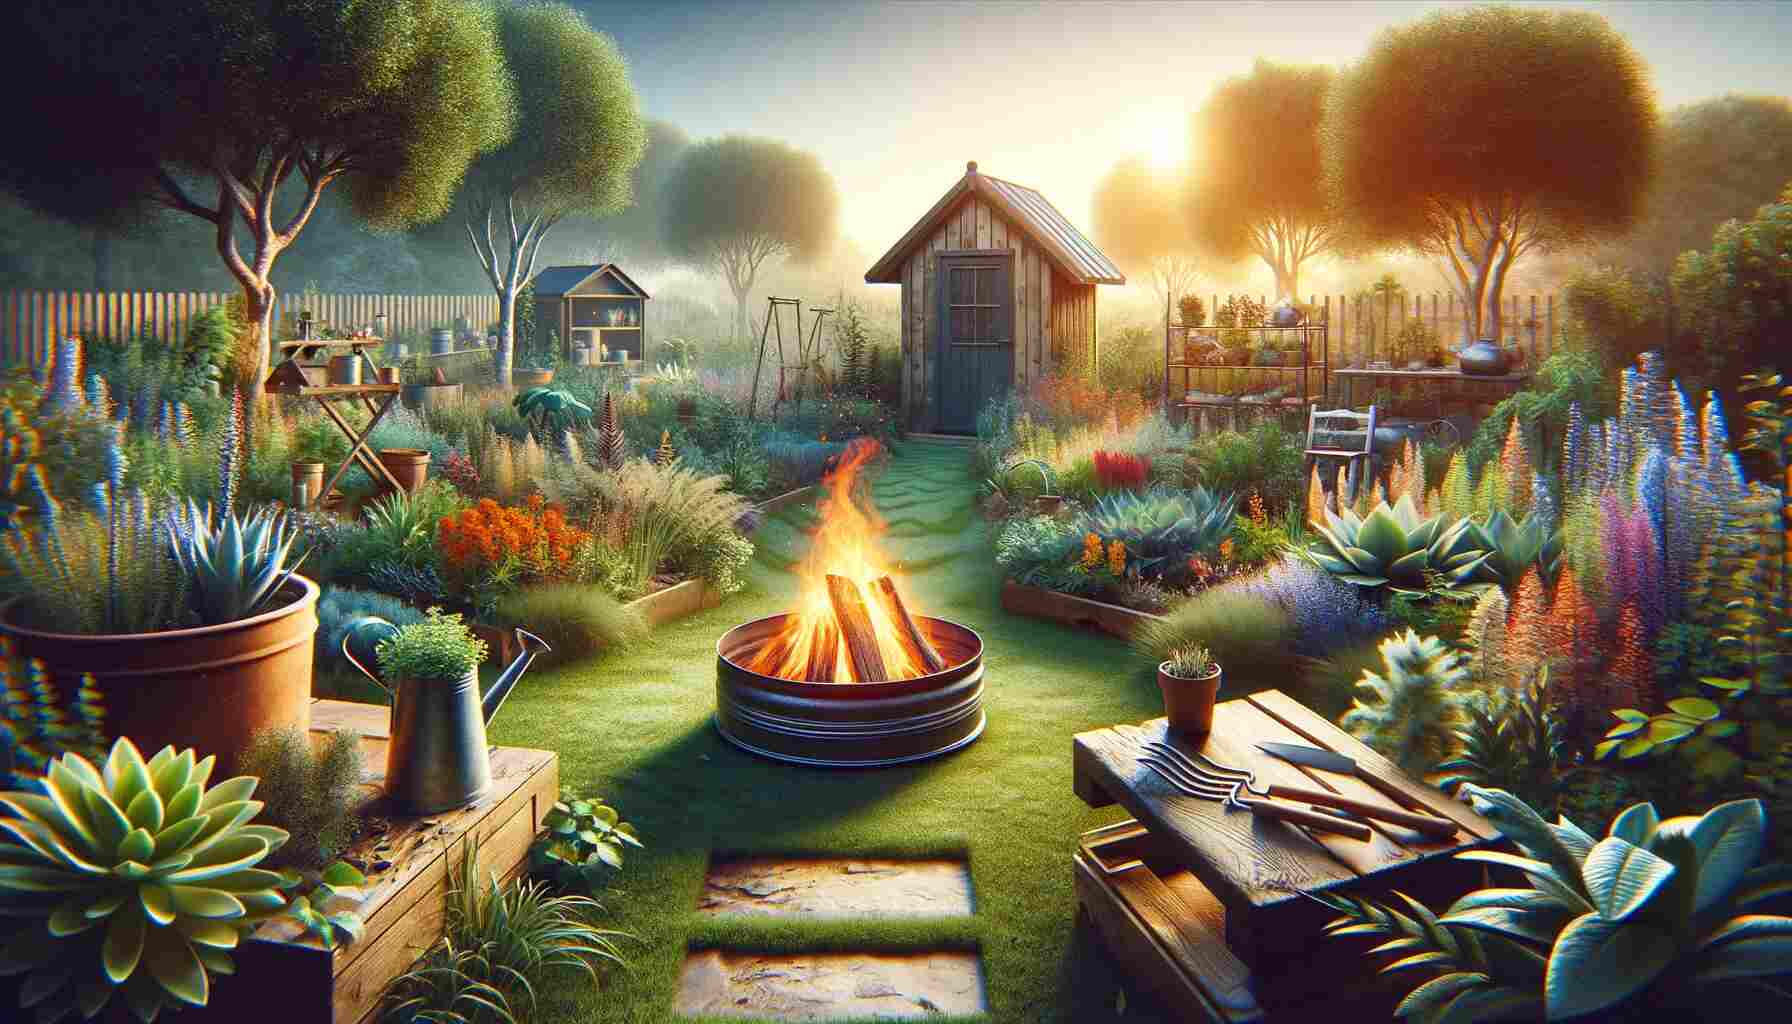 The featured image for the article "Can You Burn Wood in Your Garden: A Comprehensive Guide." Serene garden setting at dusk with a small, controlled fire pit burning wood in the center, surrounded by lush plants and flowers. In the background, a small shed and garden tools emphasize the gardening theme, under a clear sky with a hint of dusk.